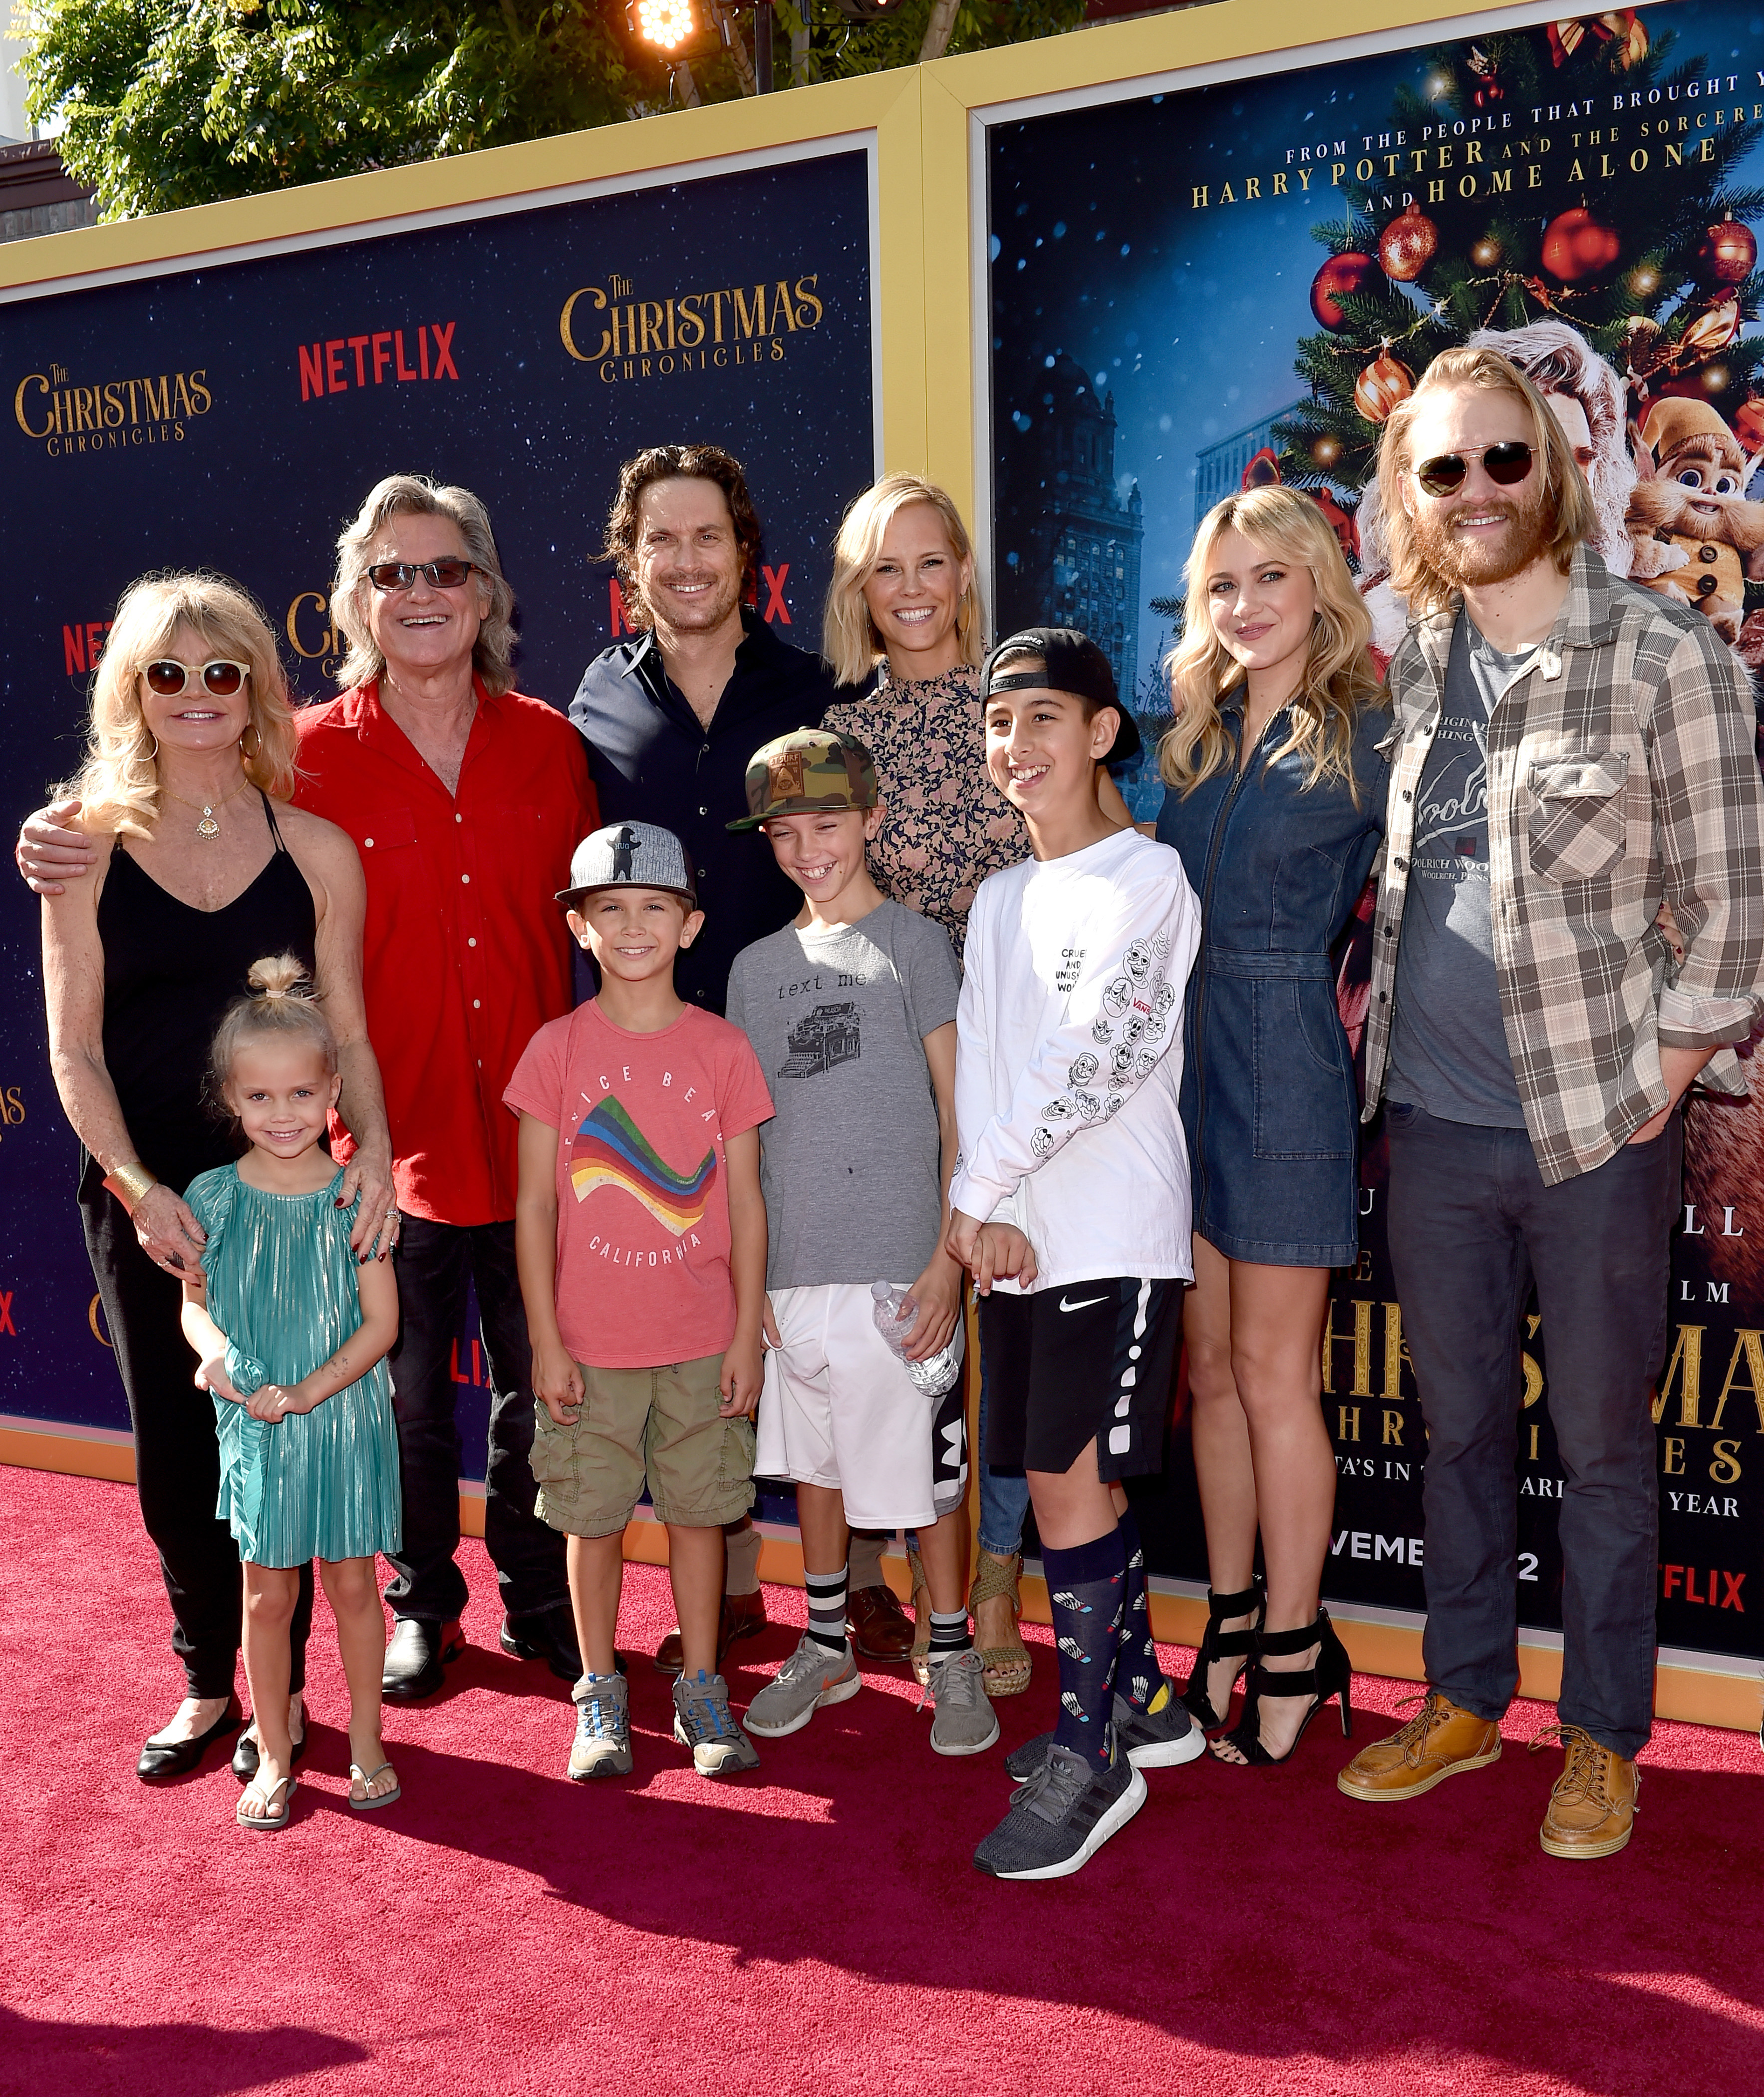 Goldie Hawn and Kurt Russell with their sons, daughters-in-law, and grandchildren attend the premiere of “The Christmas Chronicles” on November 18, 2018, in Los Angeles, California | Source: Getty Images